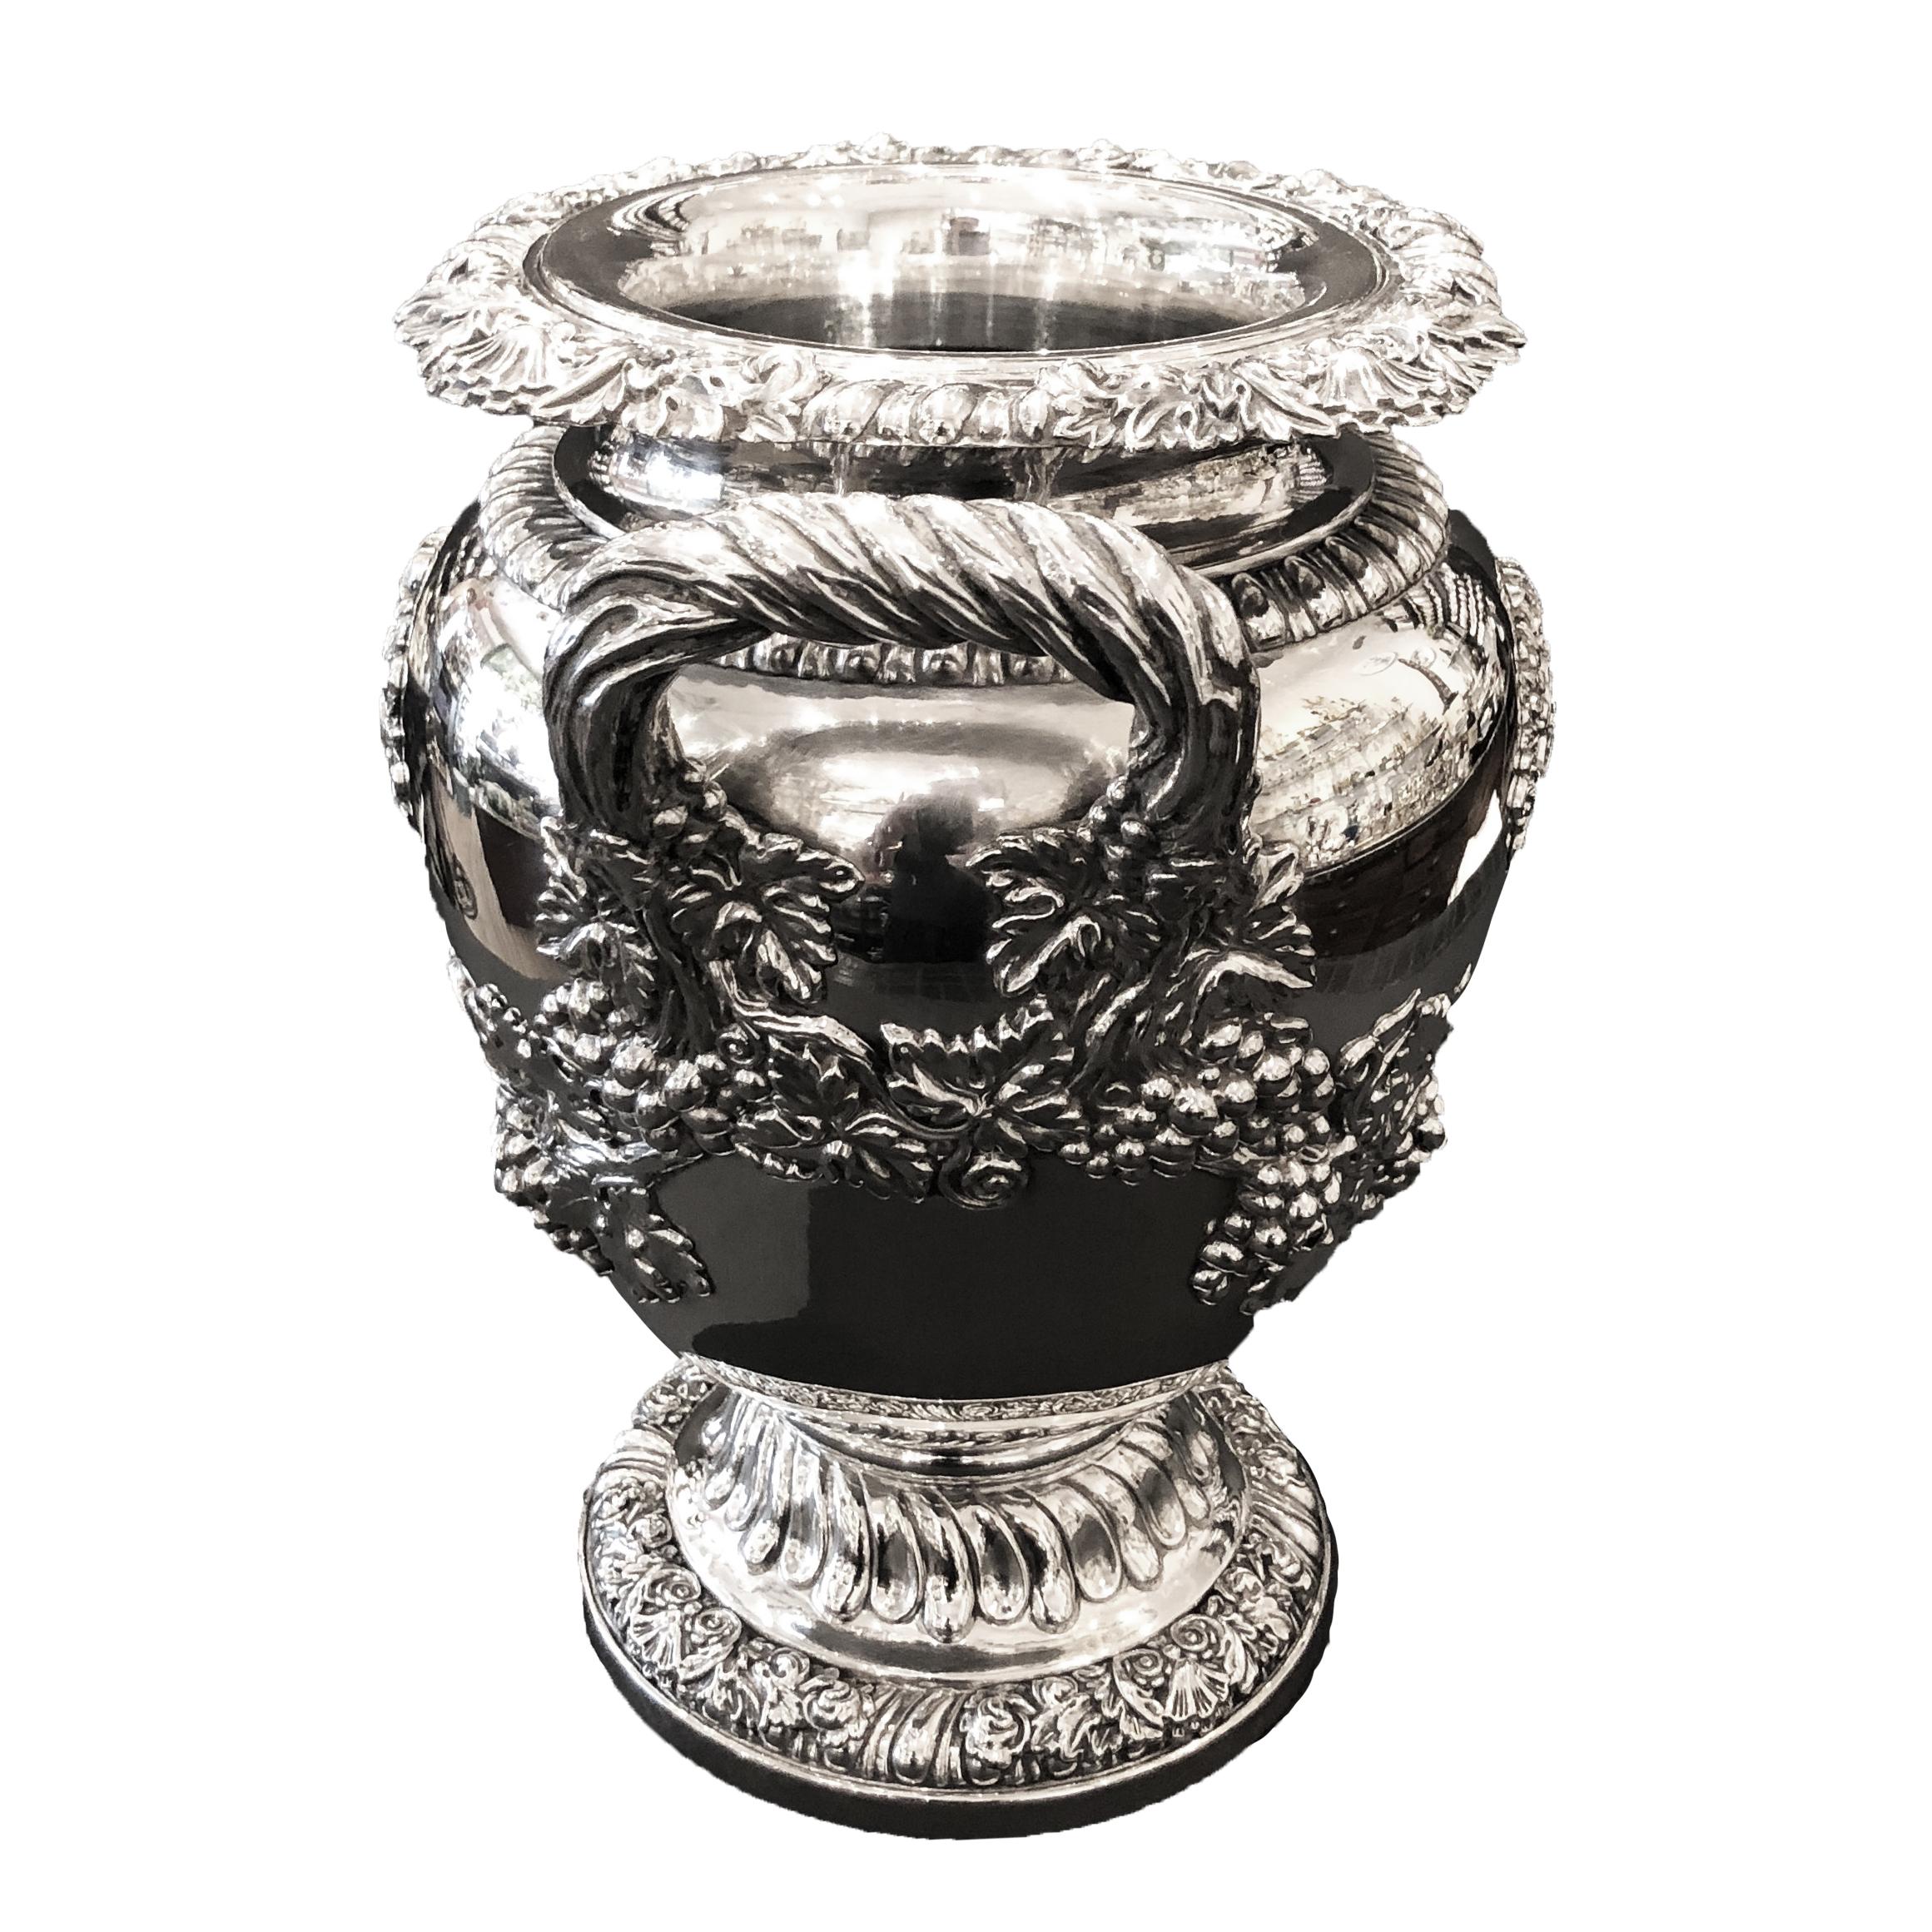 These very elegant wine coolers and liners are from Odiot favorite silversmith of emperor Napoleon the 1st 
The body of the bucket on his pedestal foot is silver plated, but all garnishing like the garlands of grapes climbing towards the handles